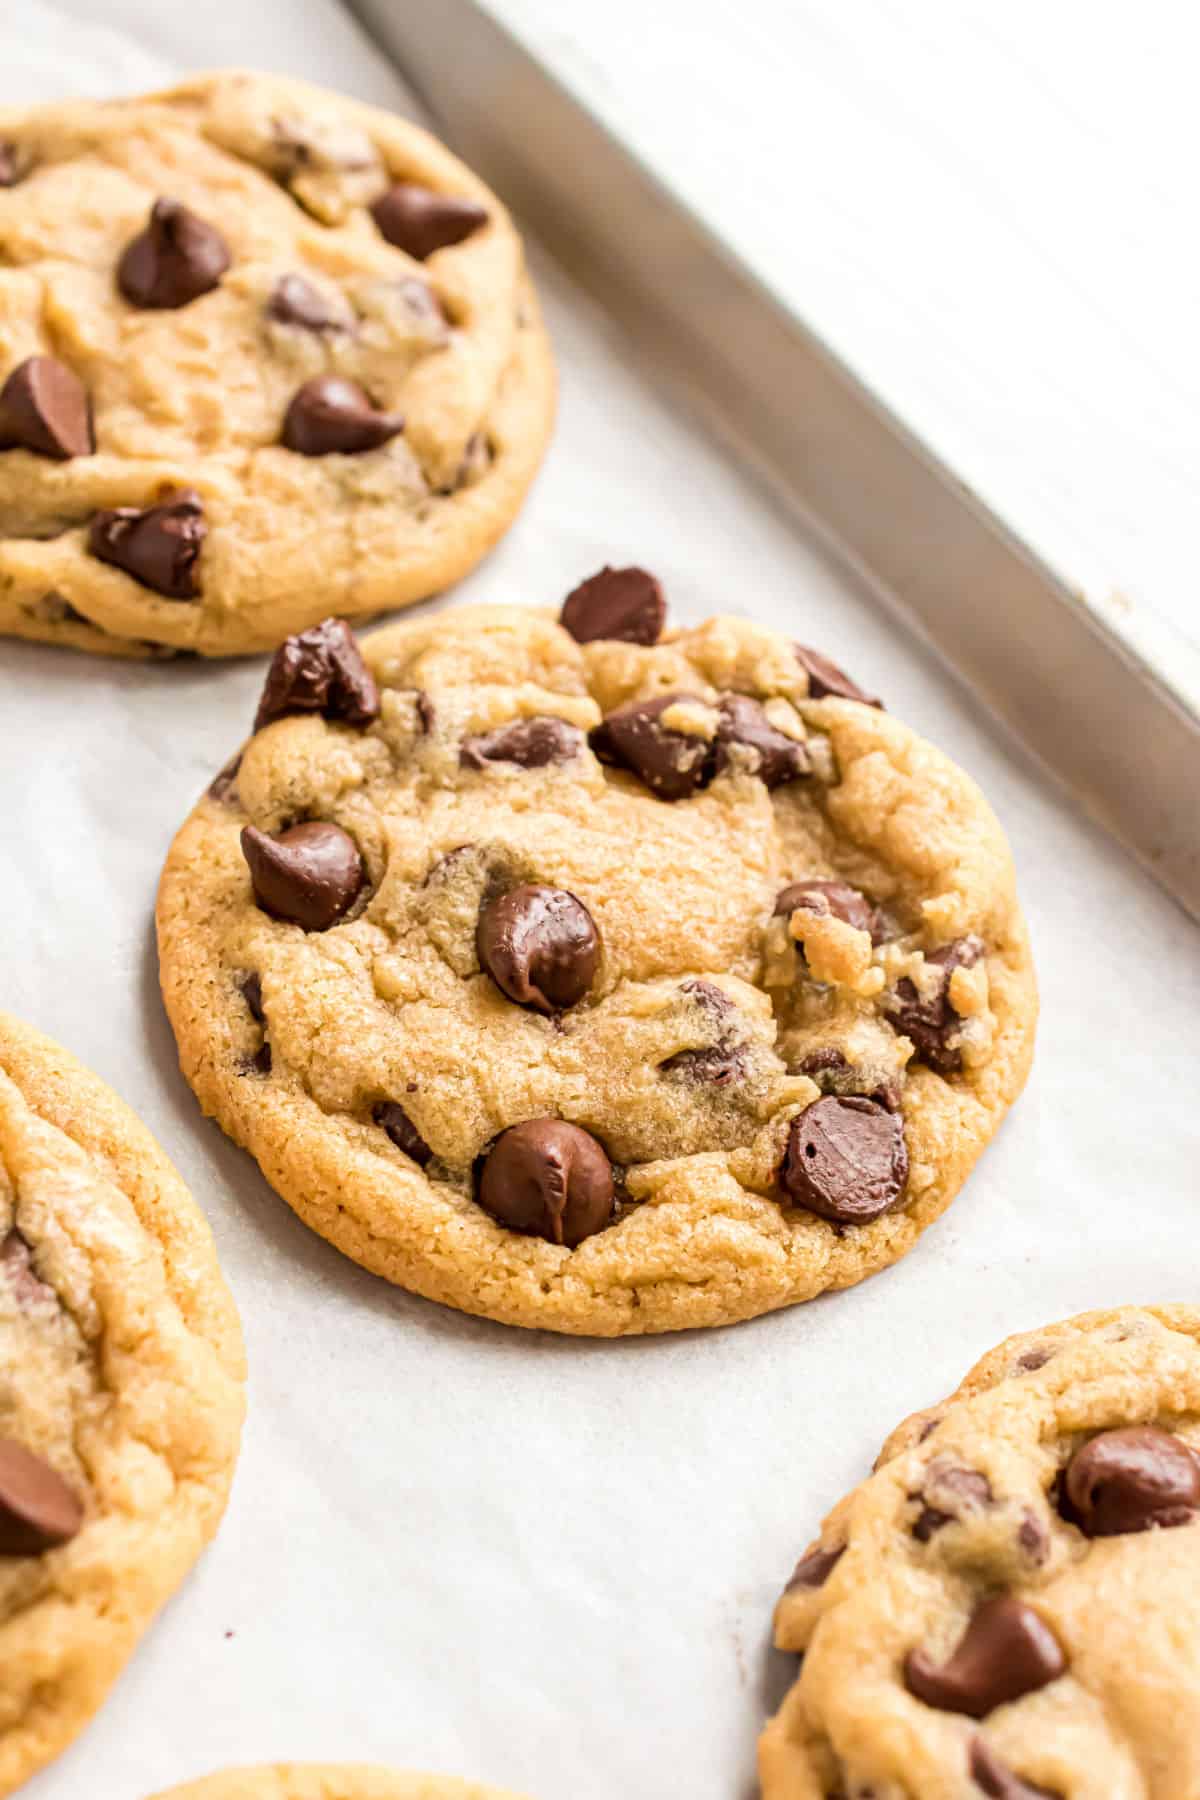 Chocolate chip cookies on baking sheet with parchment paper.